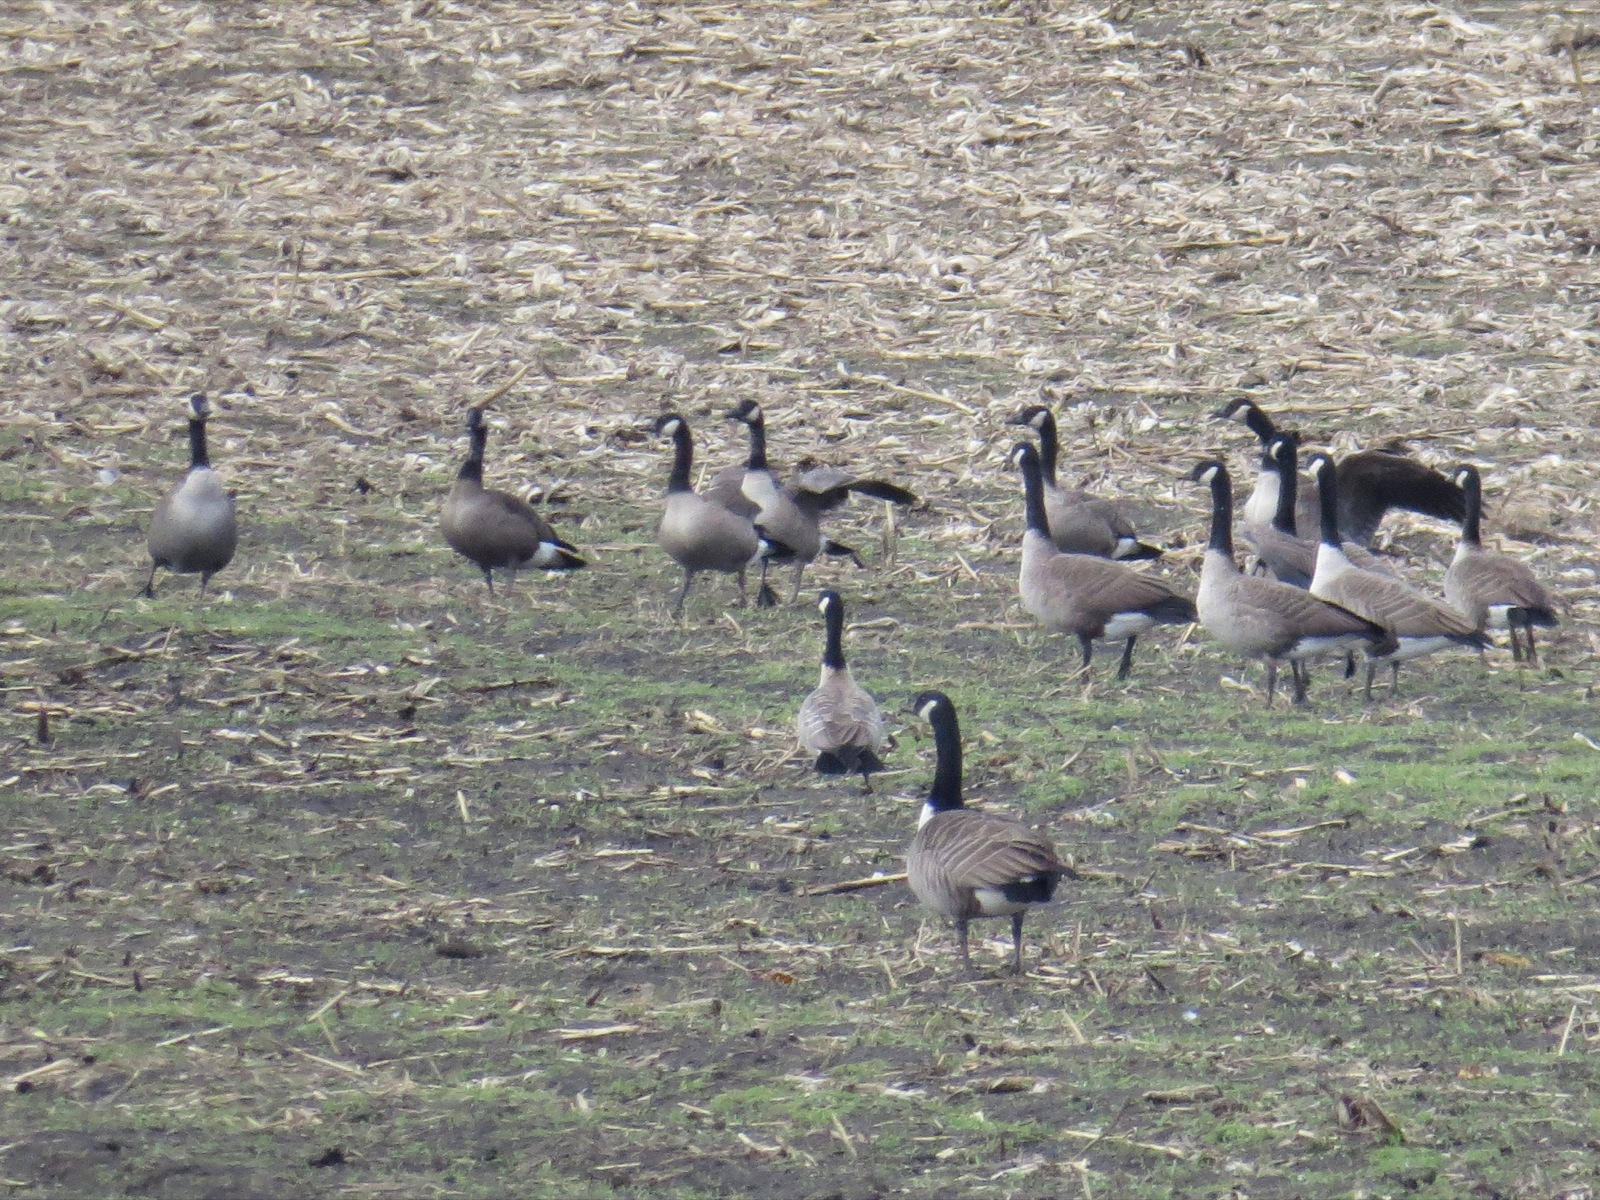 Canada Goose (front) and Cackling Goose (second from front), with a mix of intermediate birds beyond. Acton, MA, 7 Nov 2014. Photo copyright David Sibley